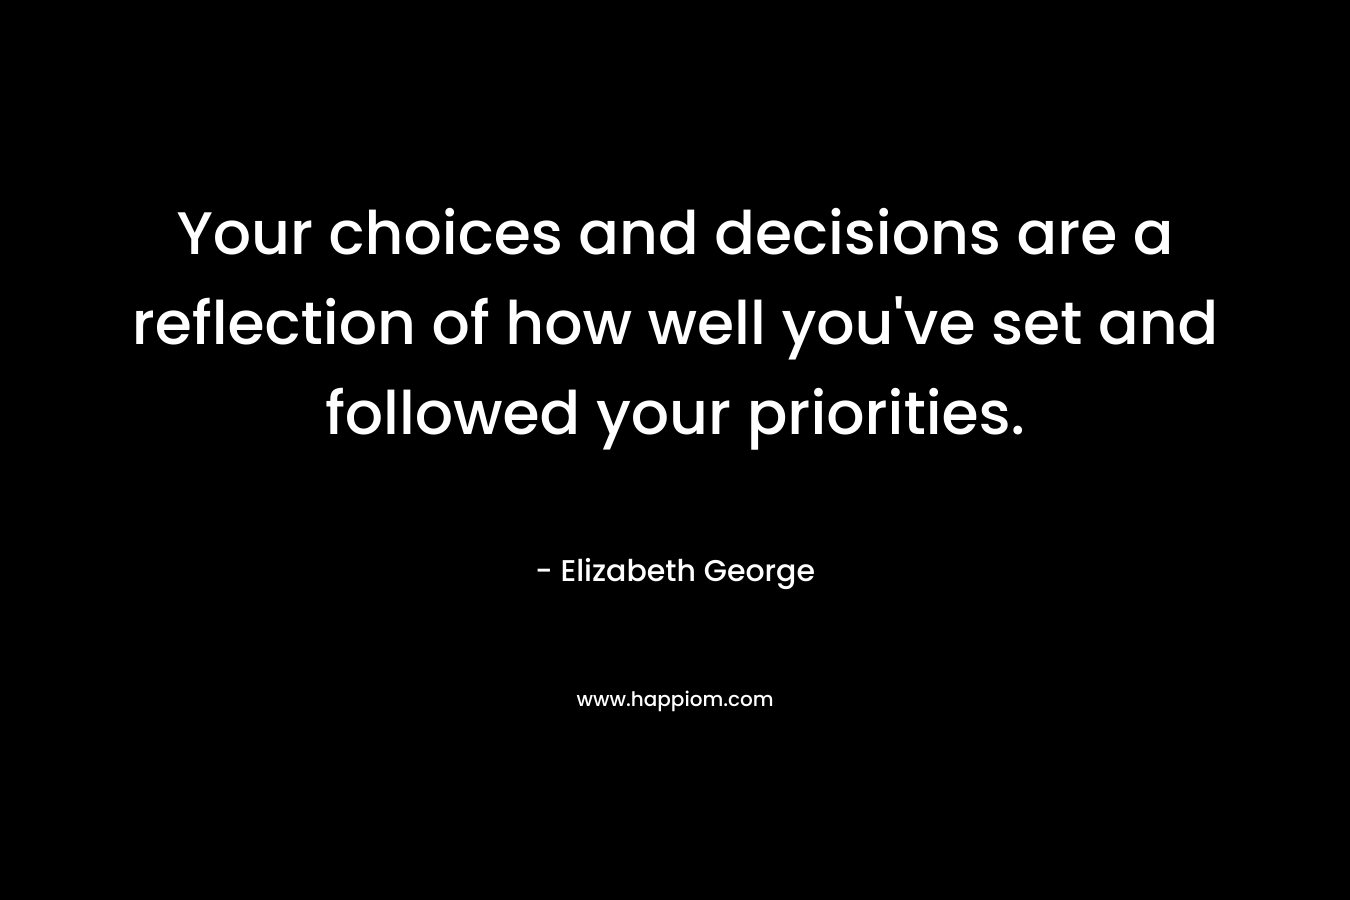 Your choices and decisions are a reflection of how well you've set and followed your priorities.